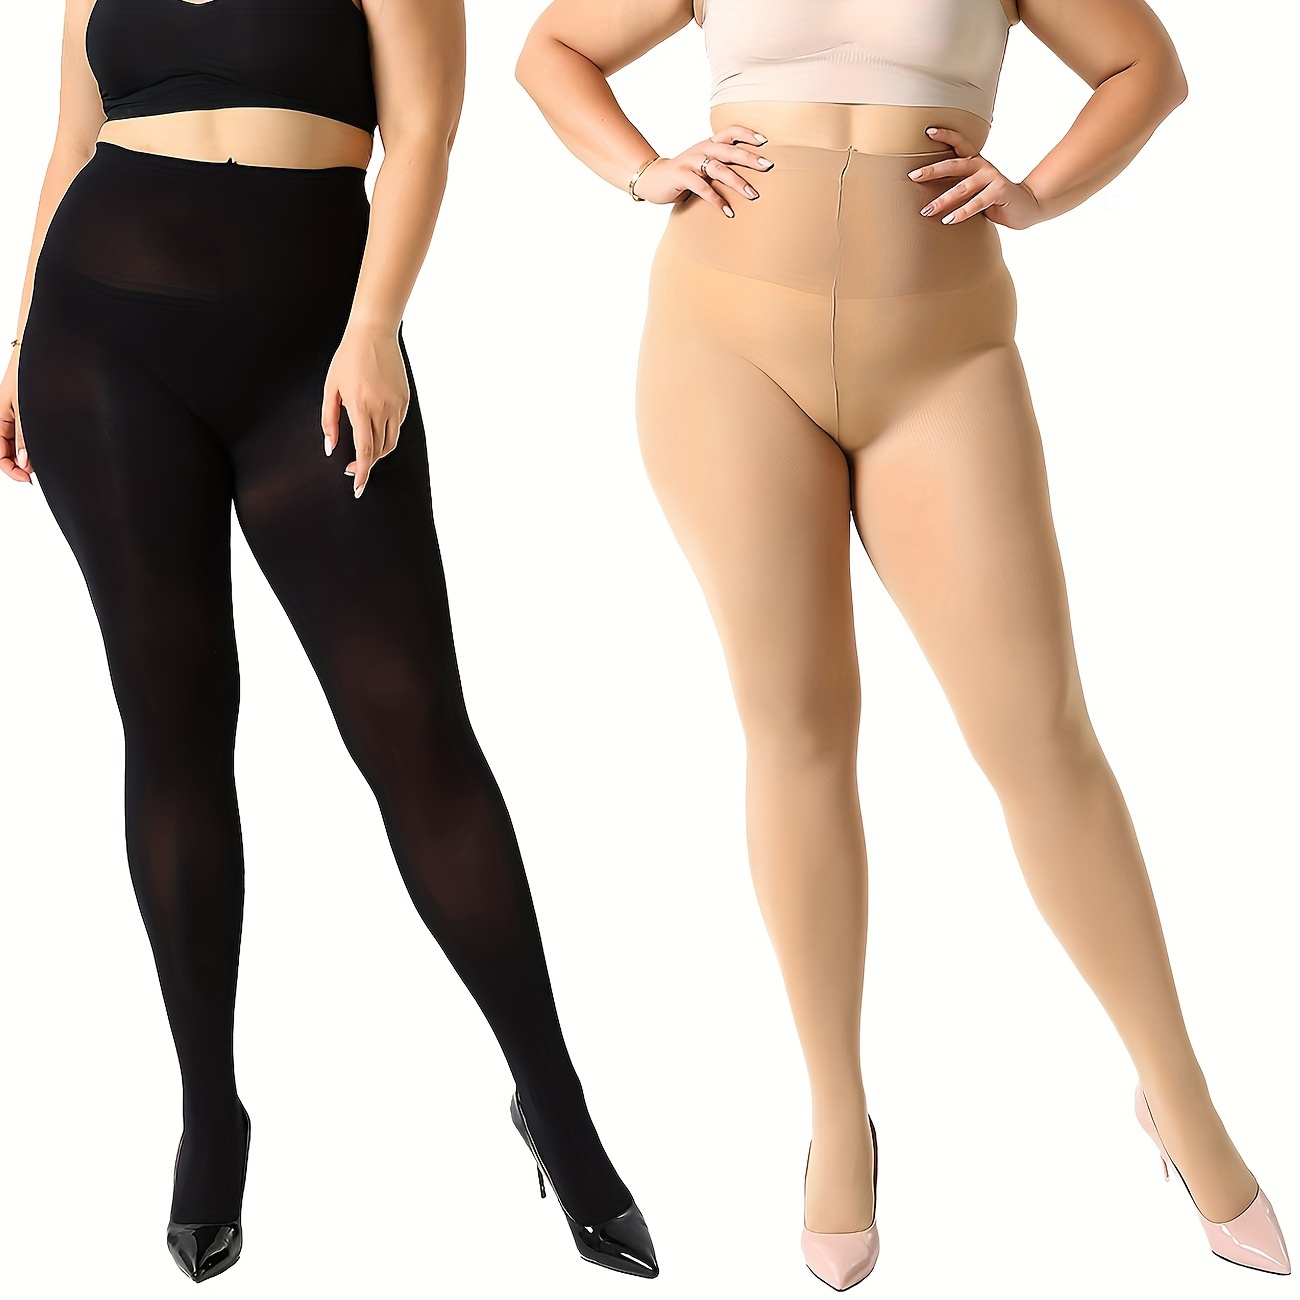 Plus Size Tights Opaque 120D Control Top Pantyhose, Women's Plus Ultra-Soft  Stockings, Fits For 160-220LBS